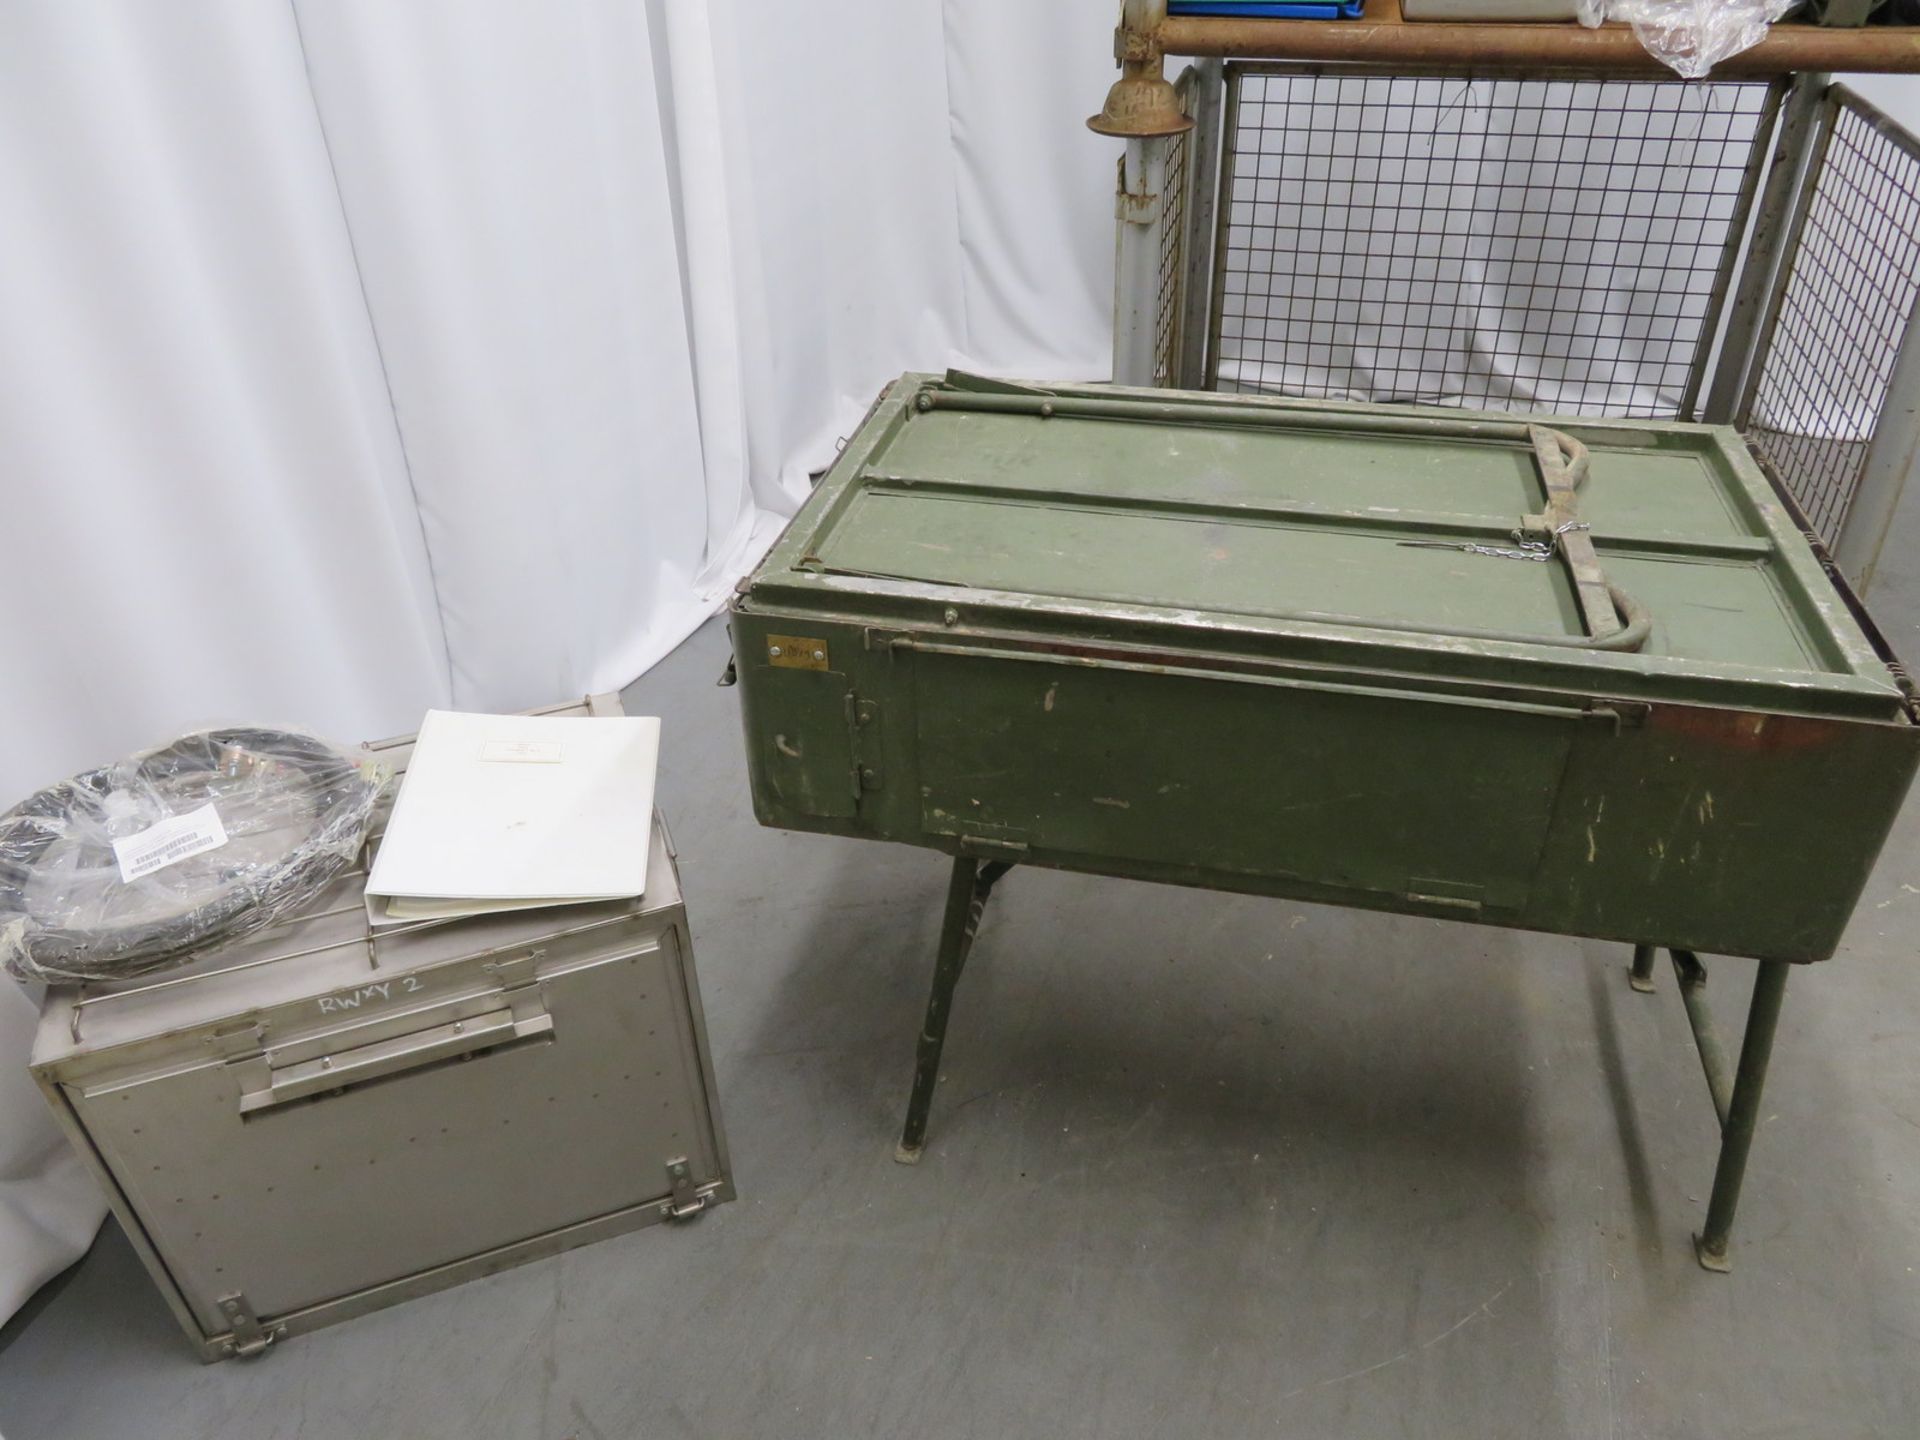 British Army No 5 field cooker & G1 No 5 hot box field oven set. - Image 23 of 24